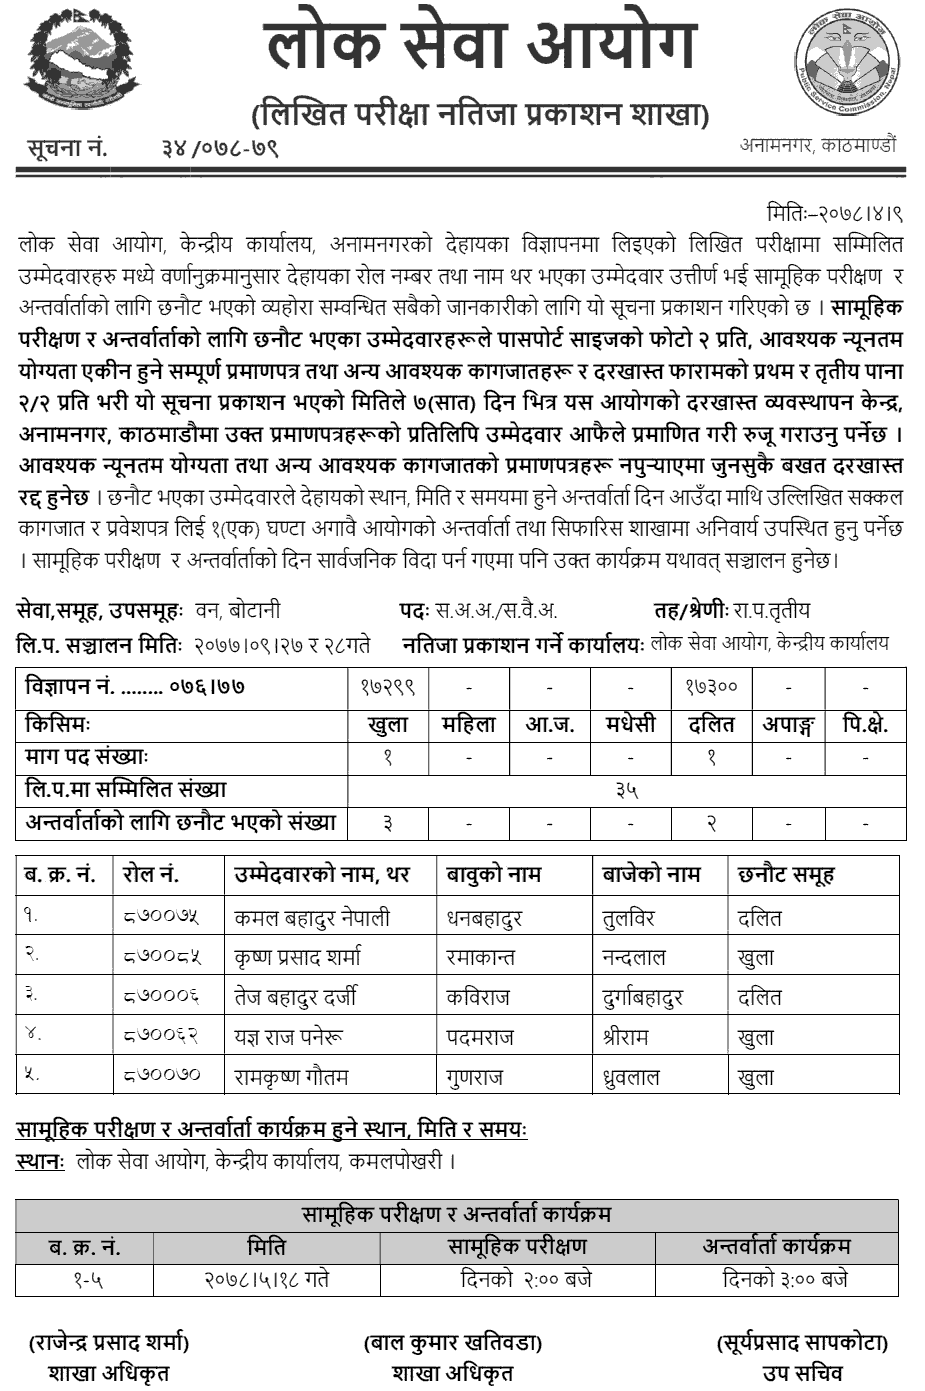 Lok Sewa Aayog Published Written Exam Result of Forest Officer (Botany Group)